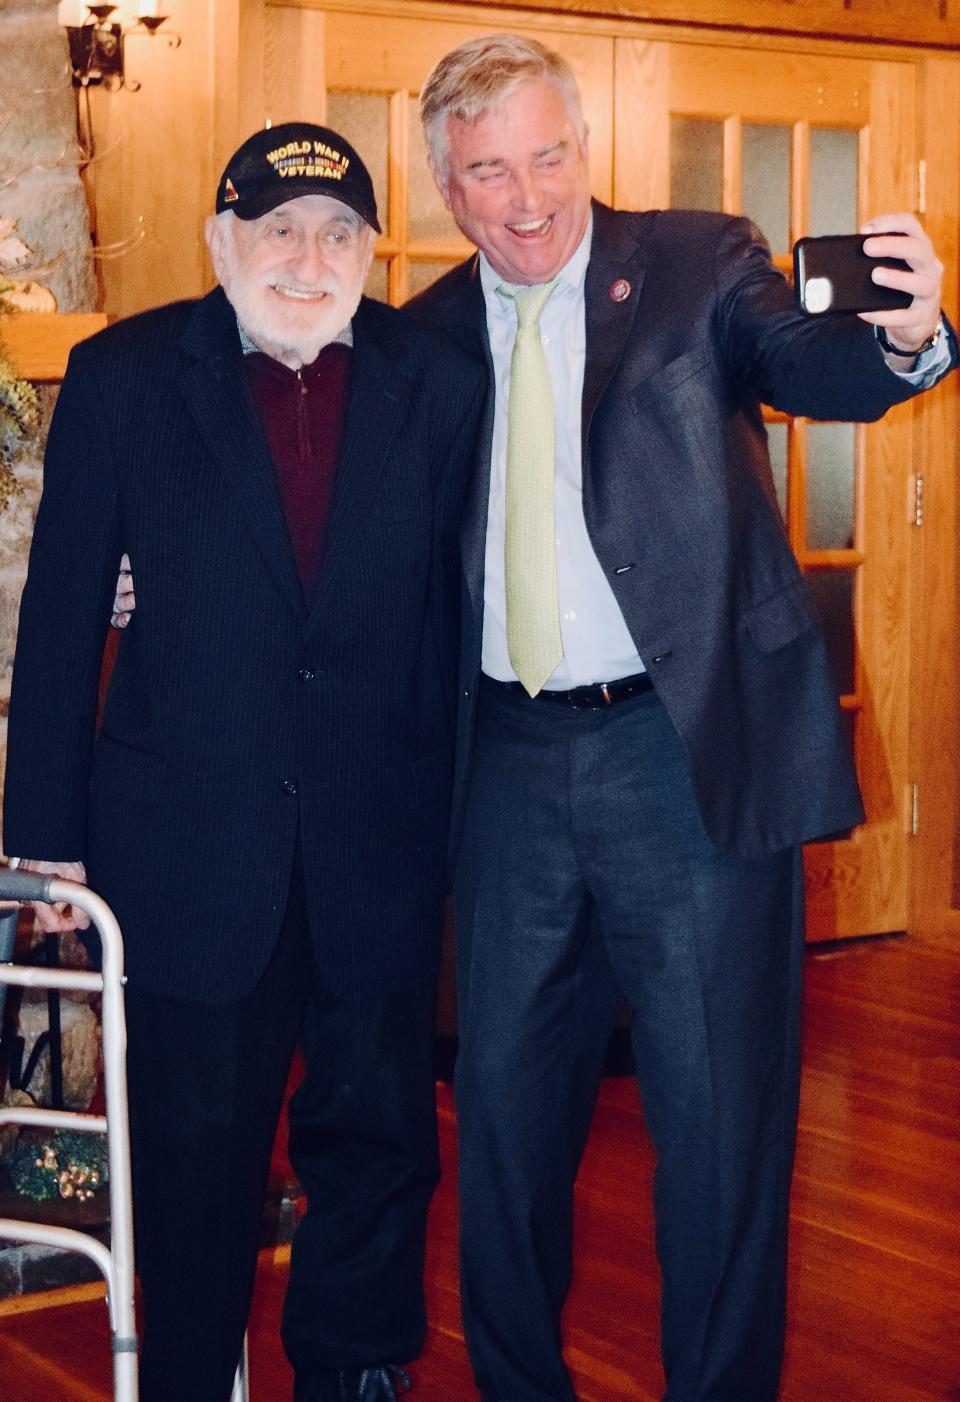 U.S. Rep. David Trone, D-6th, right, snaps a selfie with Ritchie Boy Gideon Kantor on Monday after announcing legislation nominating the Ritchie Boys for a Congressional Gold Medal.